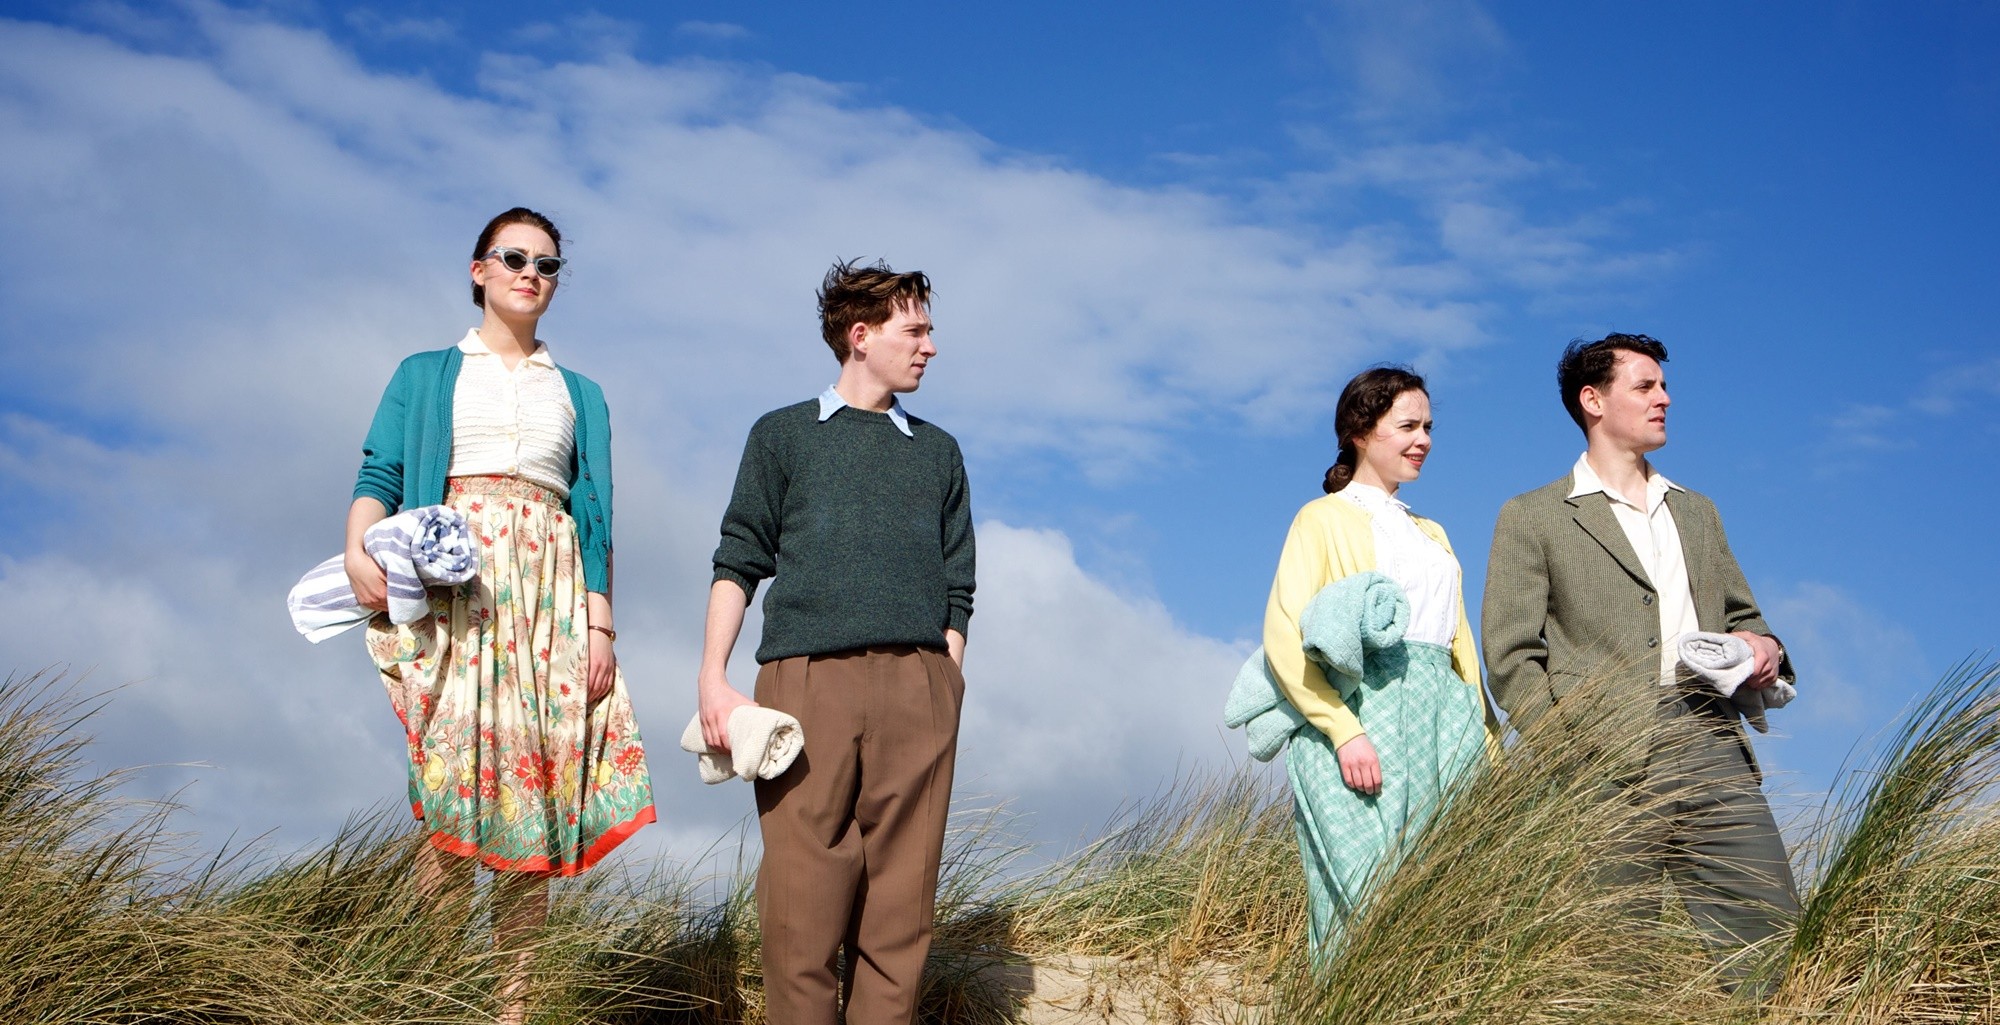 Saoirse Ronan, Domhnall Gleeson, Nora-Jane Noone and Peter Campion in Fox Searchlight Pictures' Brooklyn (2015)